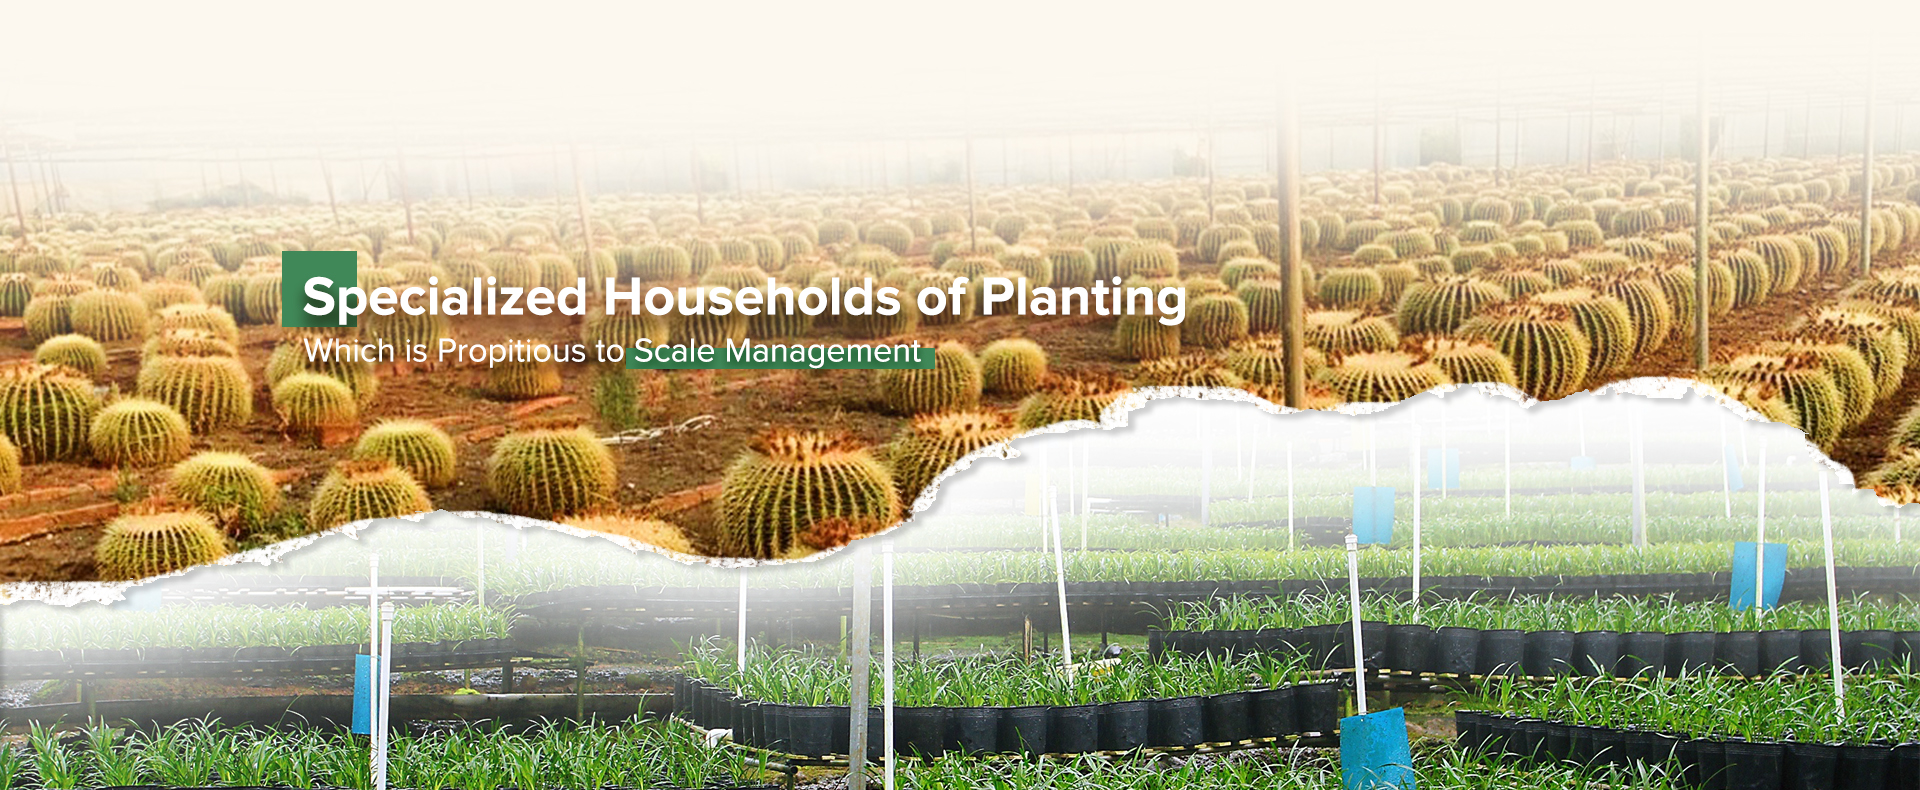 Specialized households of planting with is propitious to sale management